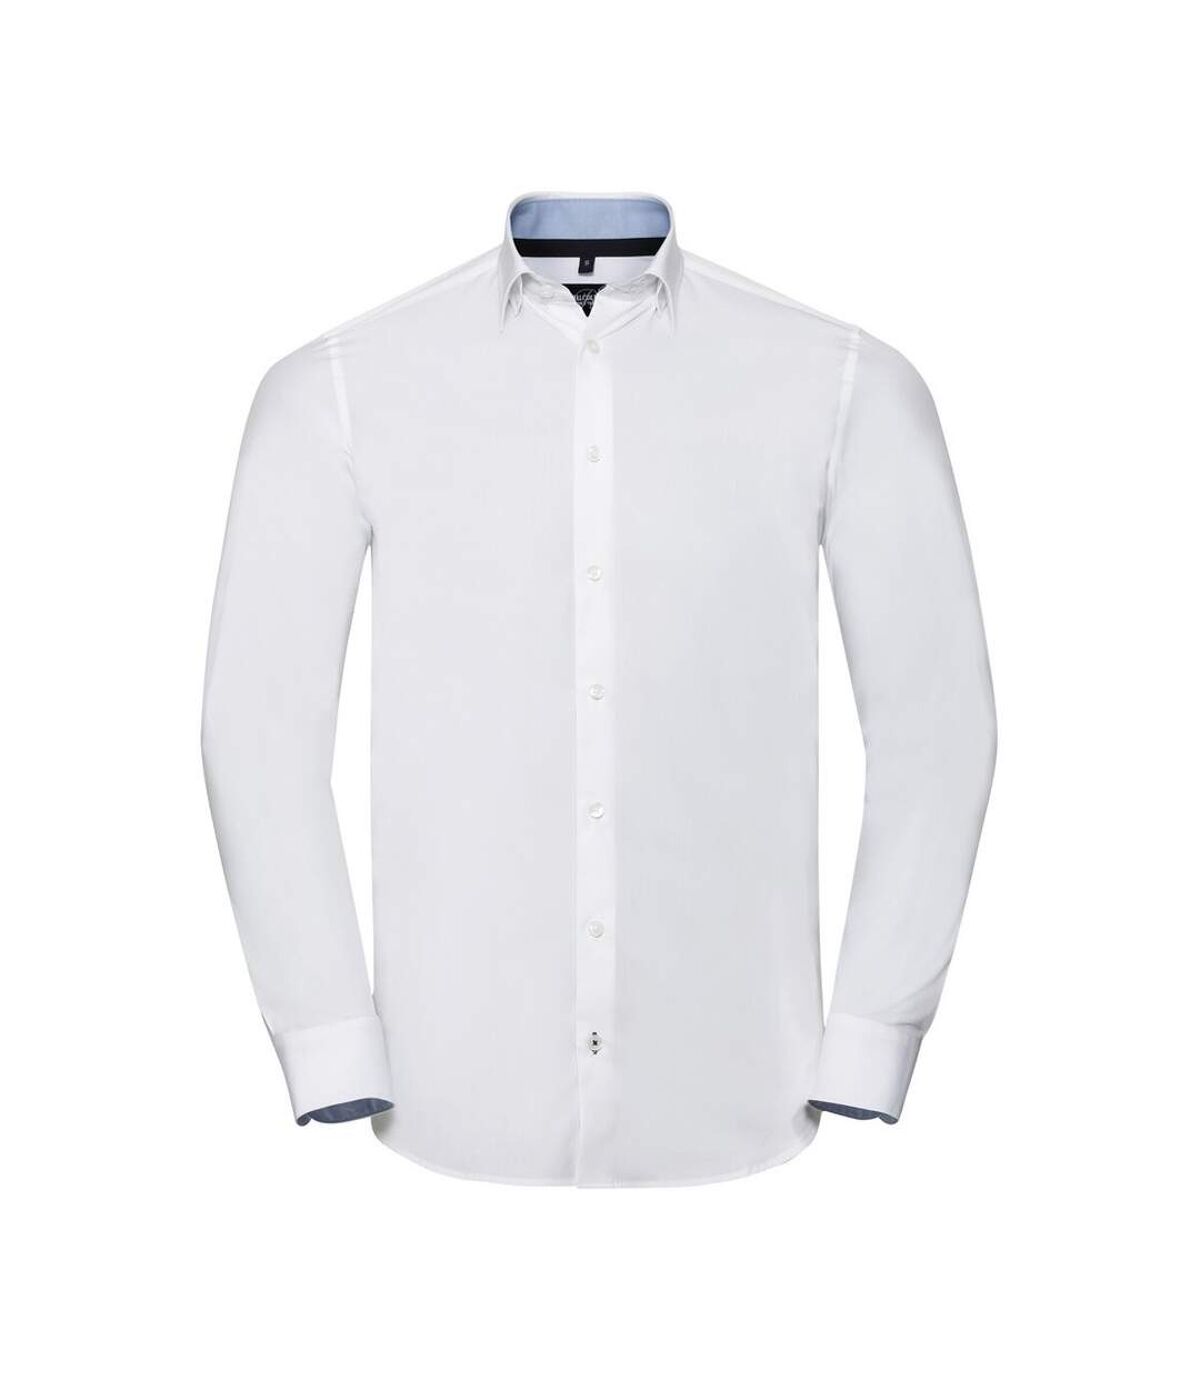 Russell Collection - Chemise - Homme (Blanc / Bleu) - UTPC3683